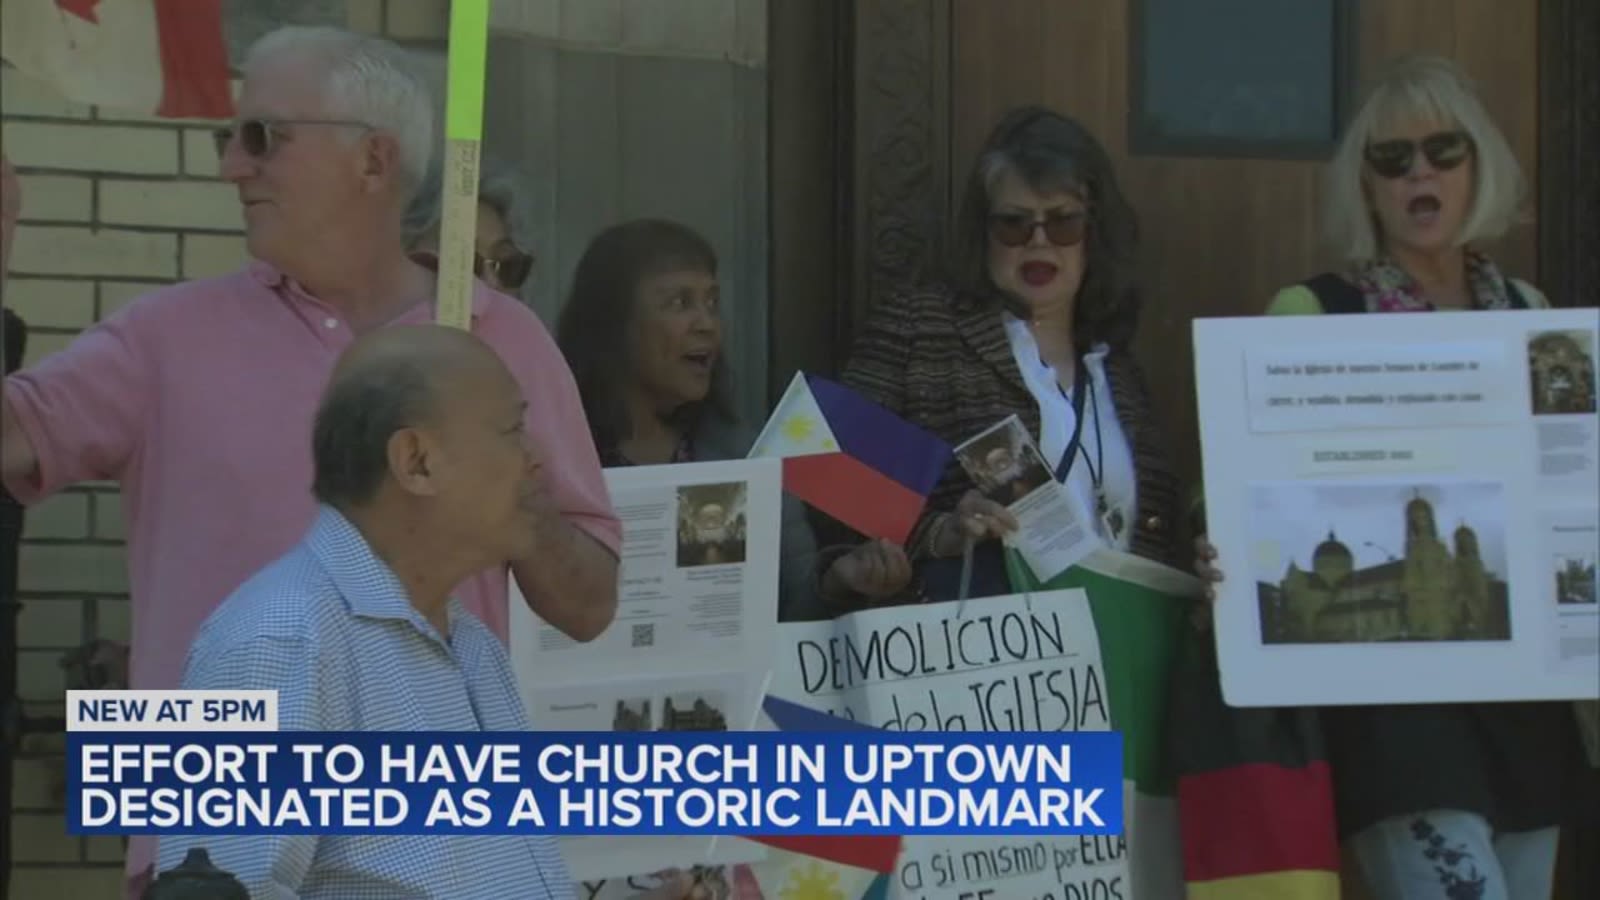 Group fights to designate Our Lady of Lourdes Church as historic landmark in Uptown